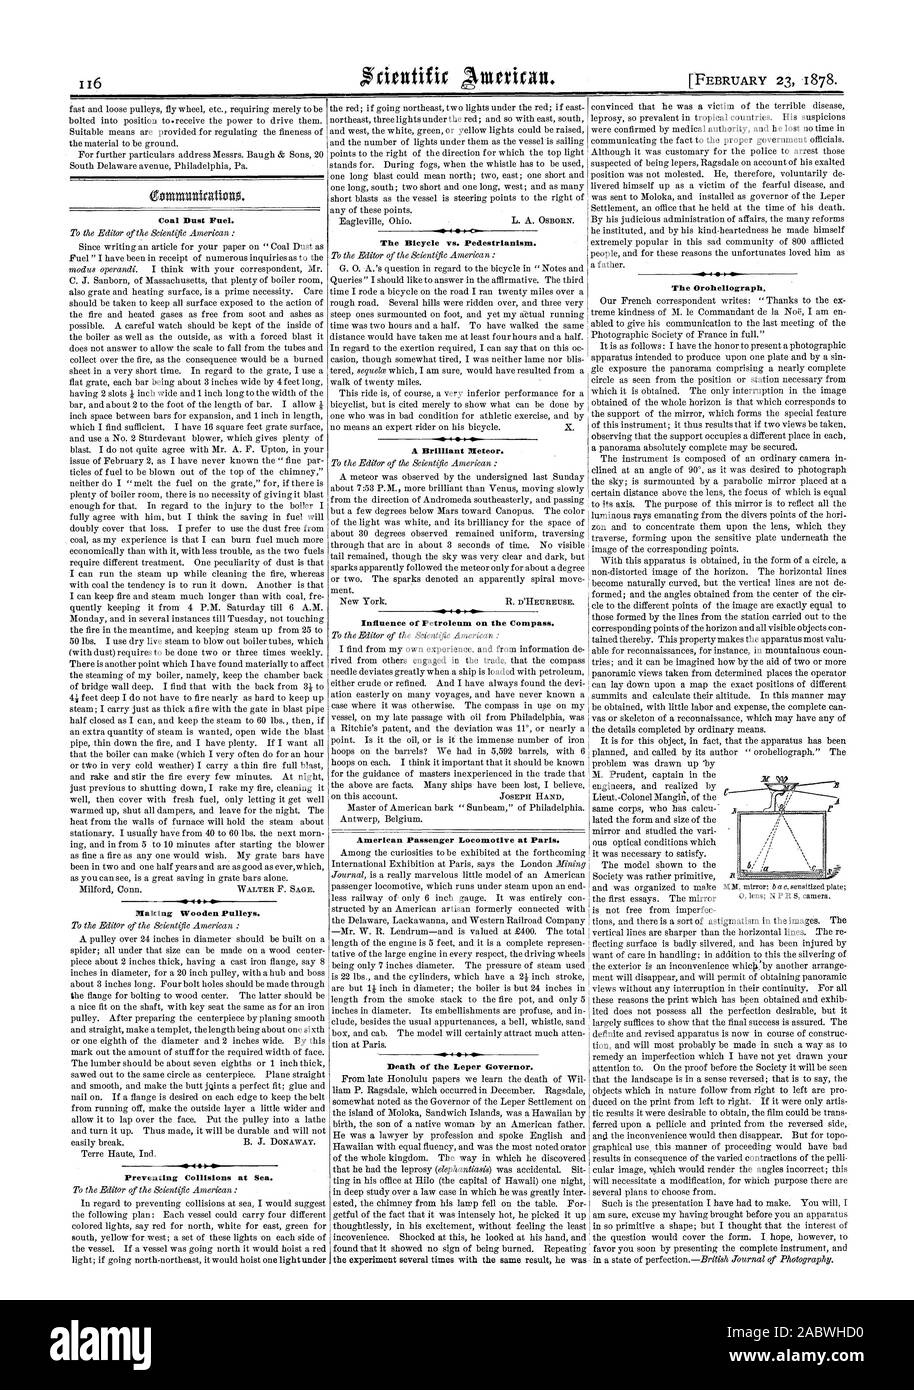 Coal Bust Fuel. Making Wooden Pulleys. Preventing Collisions at Sea. The Bicycle vs. Pedestrianism. A Brilliant Meteor. Influence of Petroleum on the Compass. American Passenger Locomotive at Paris. Death of the Leper Governor. The Orohellograph, scientific american, 1878-02-23 Stock Photo